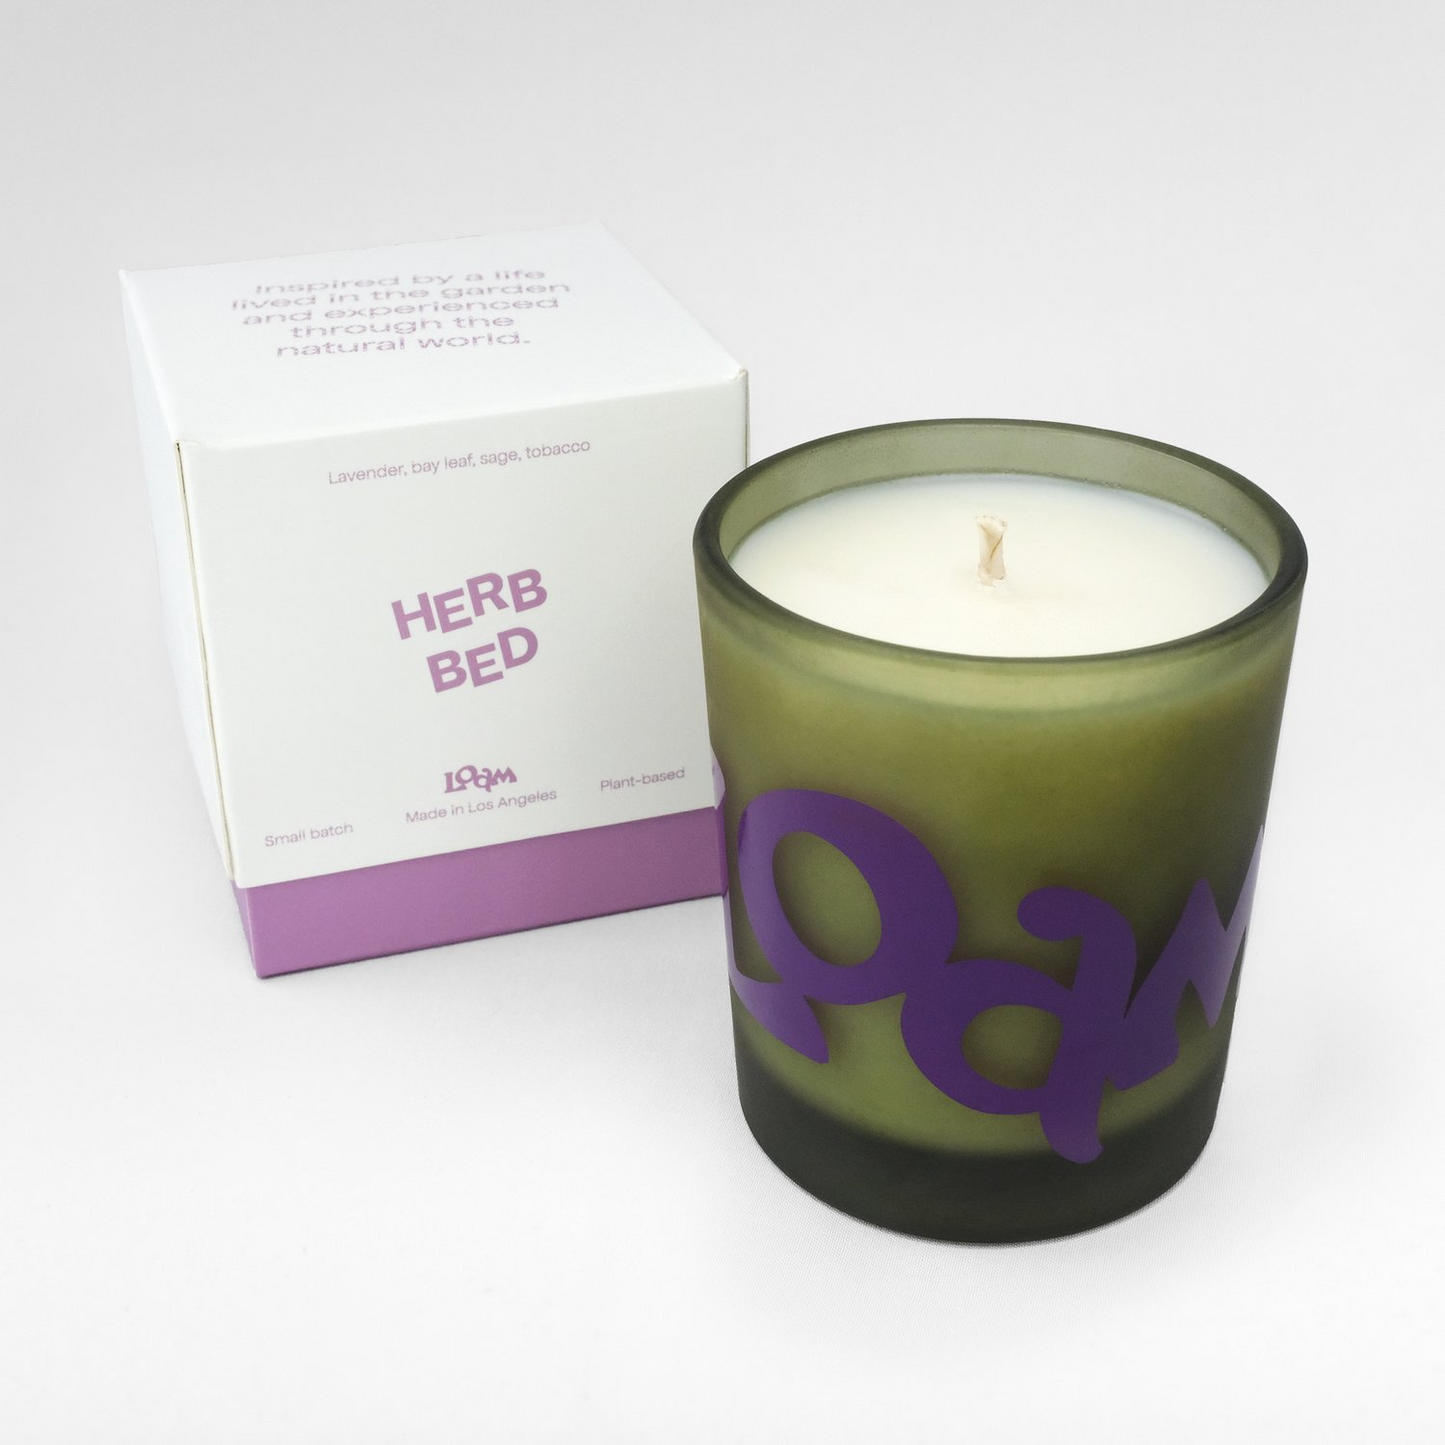 Herb Bed Candle - The Crowd Went Wild